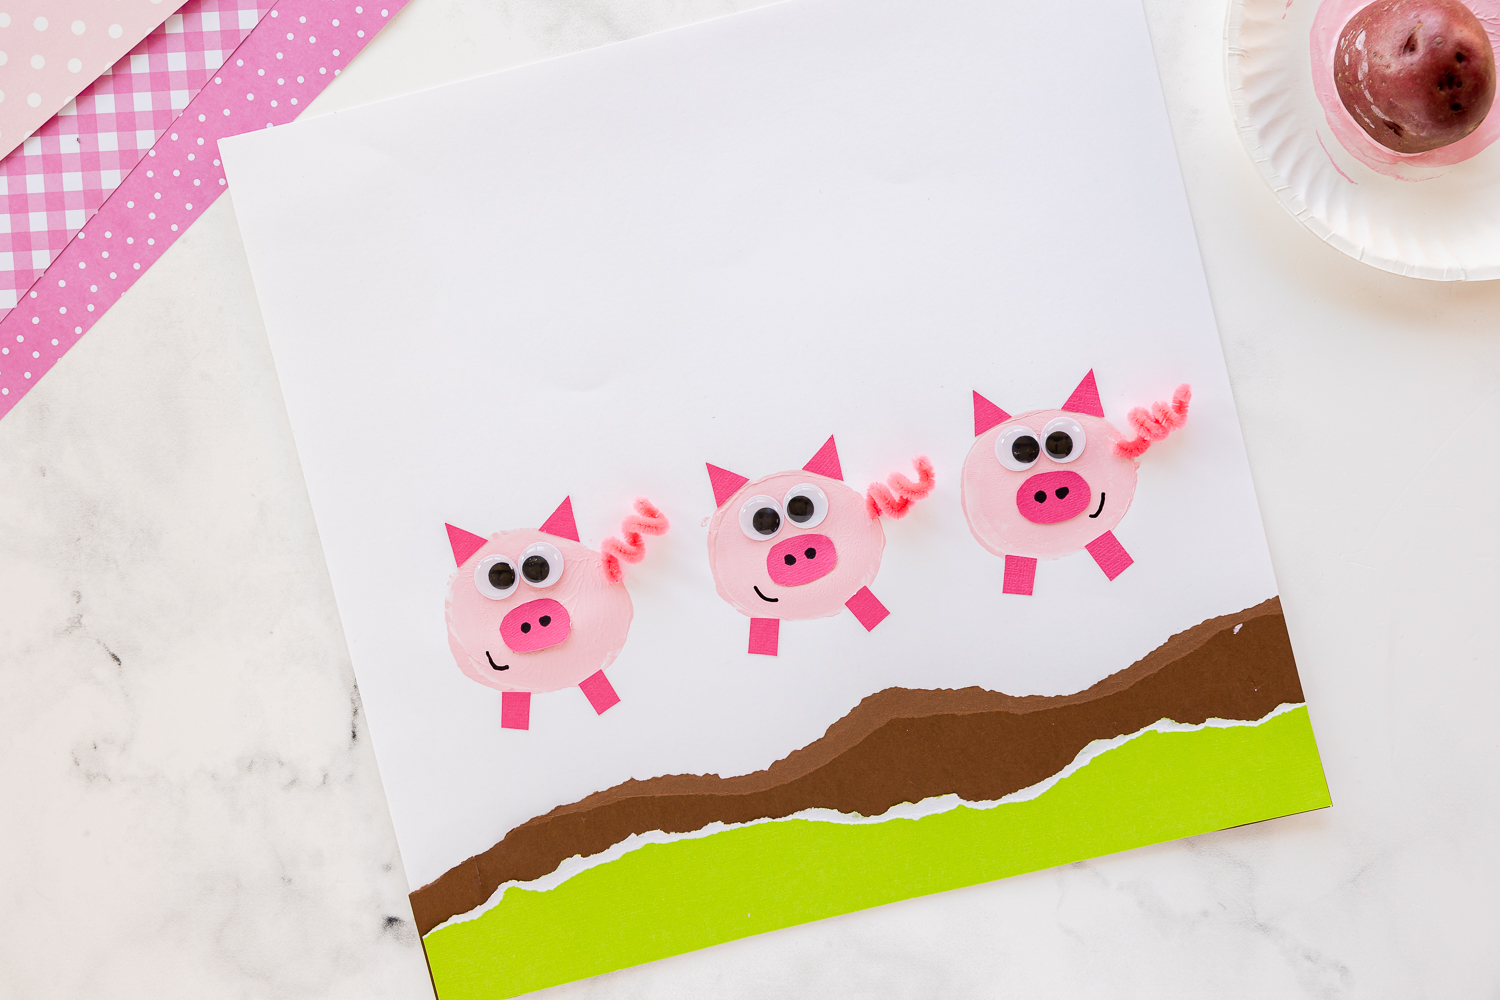 potato stamped pig art with paper plate and potato nearby